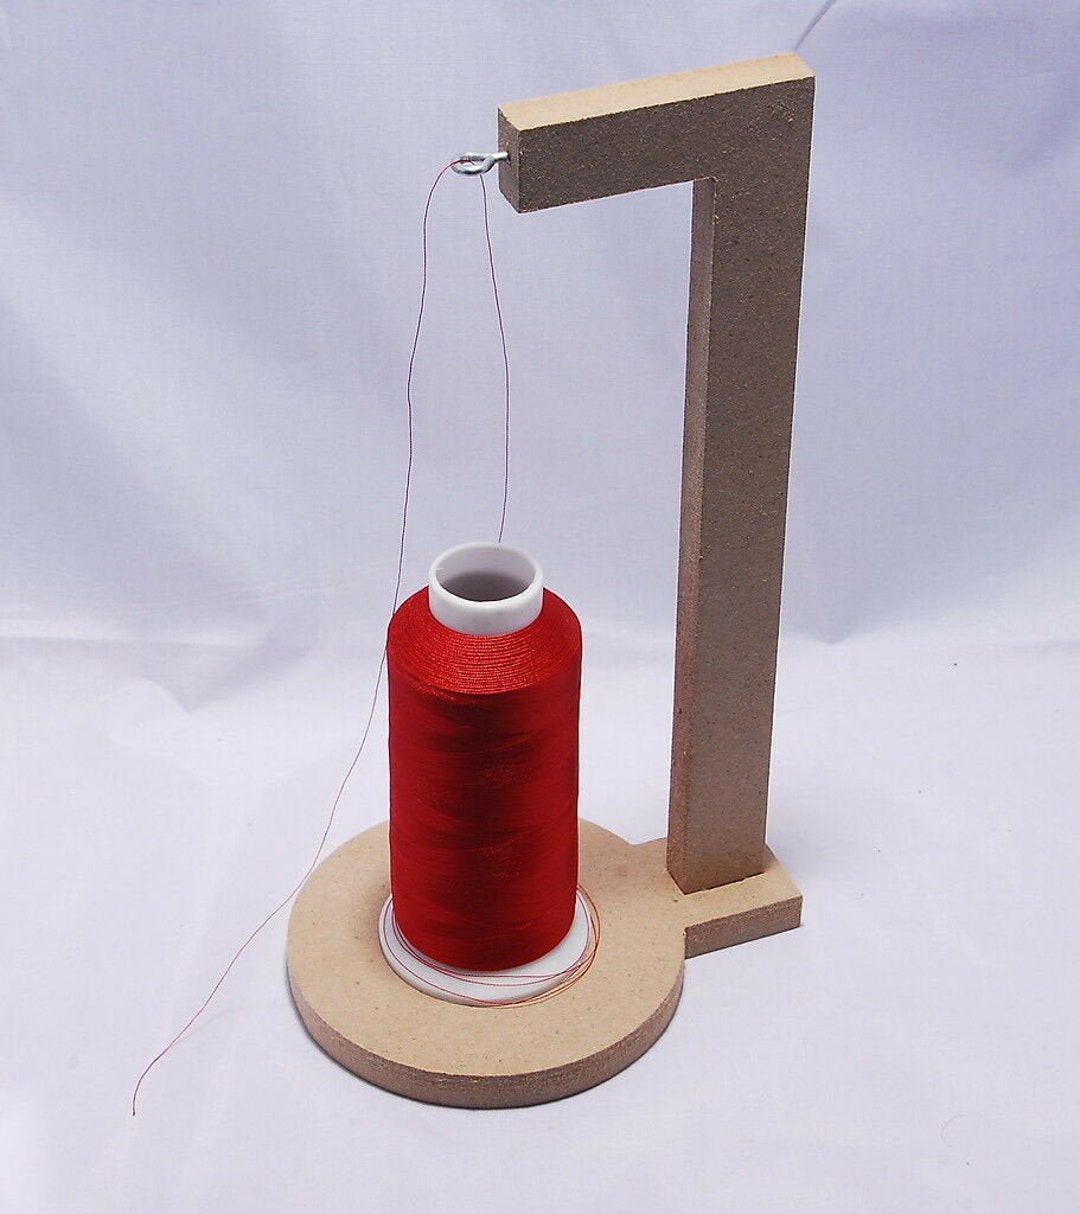 10 SPOOL THREAD STAND FOR DOMESTIC EMBROIDERY/SEWING MACHINE